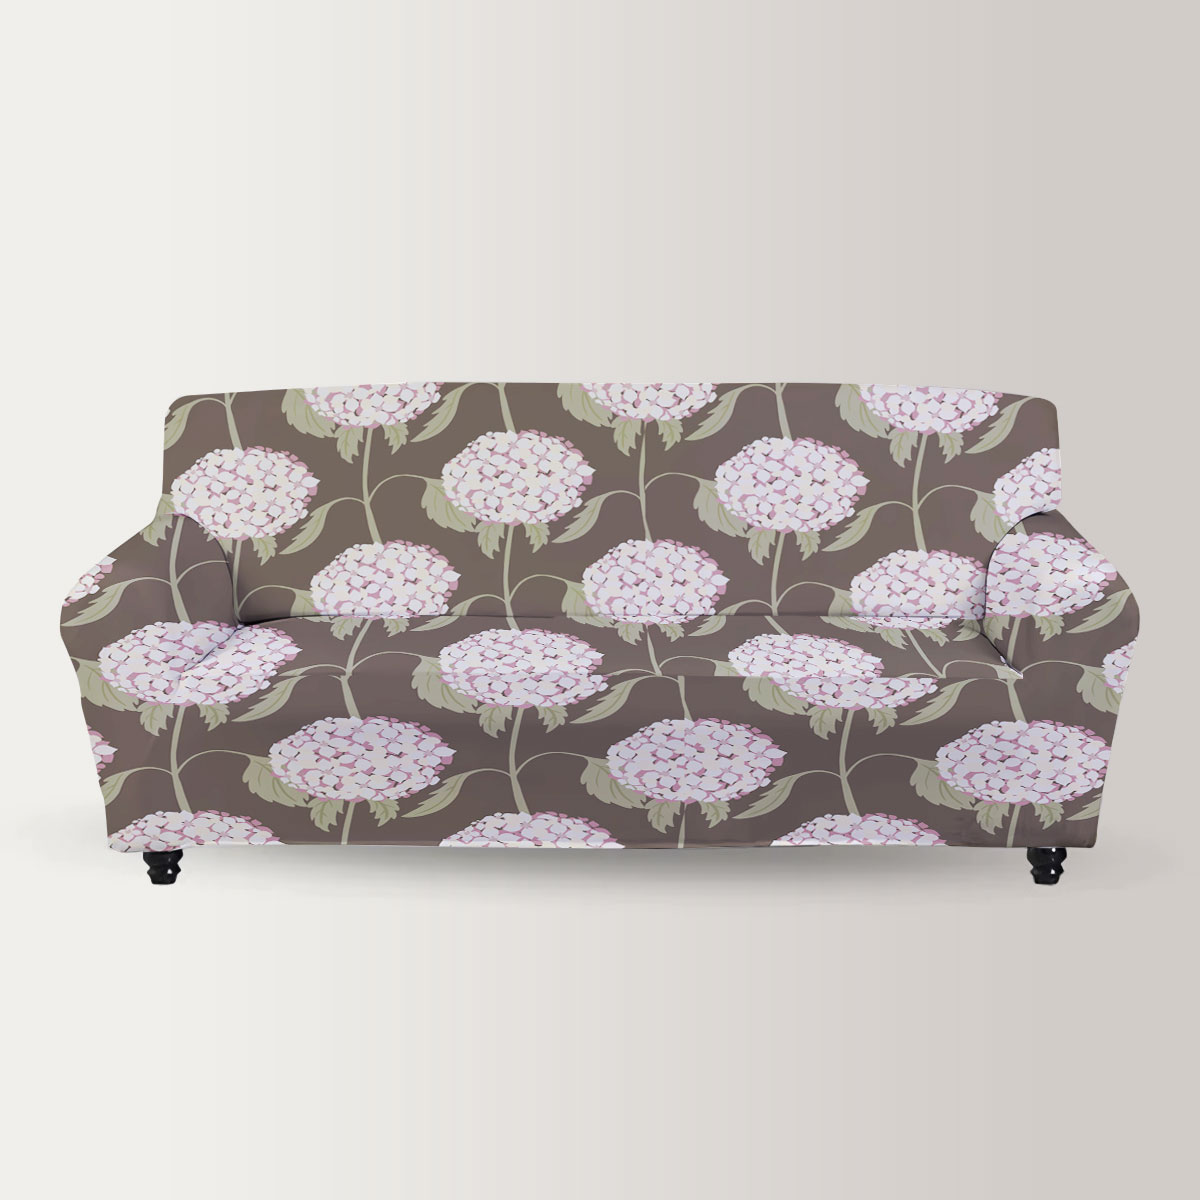 Abstract Nature With White Hydrangea Flowers Sofa Cover